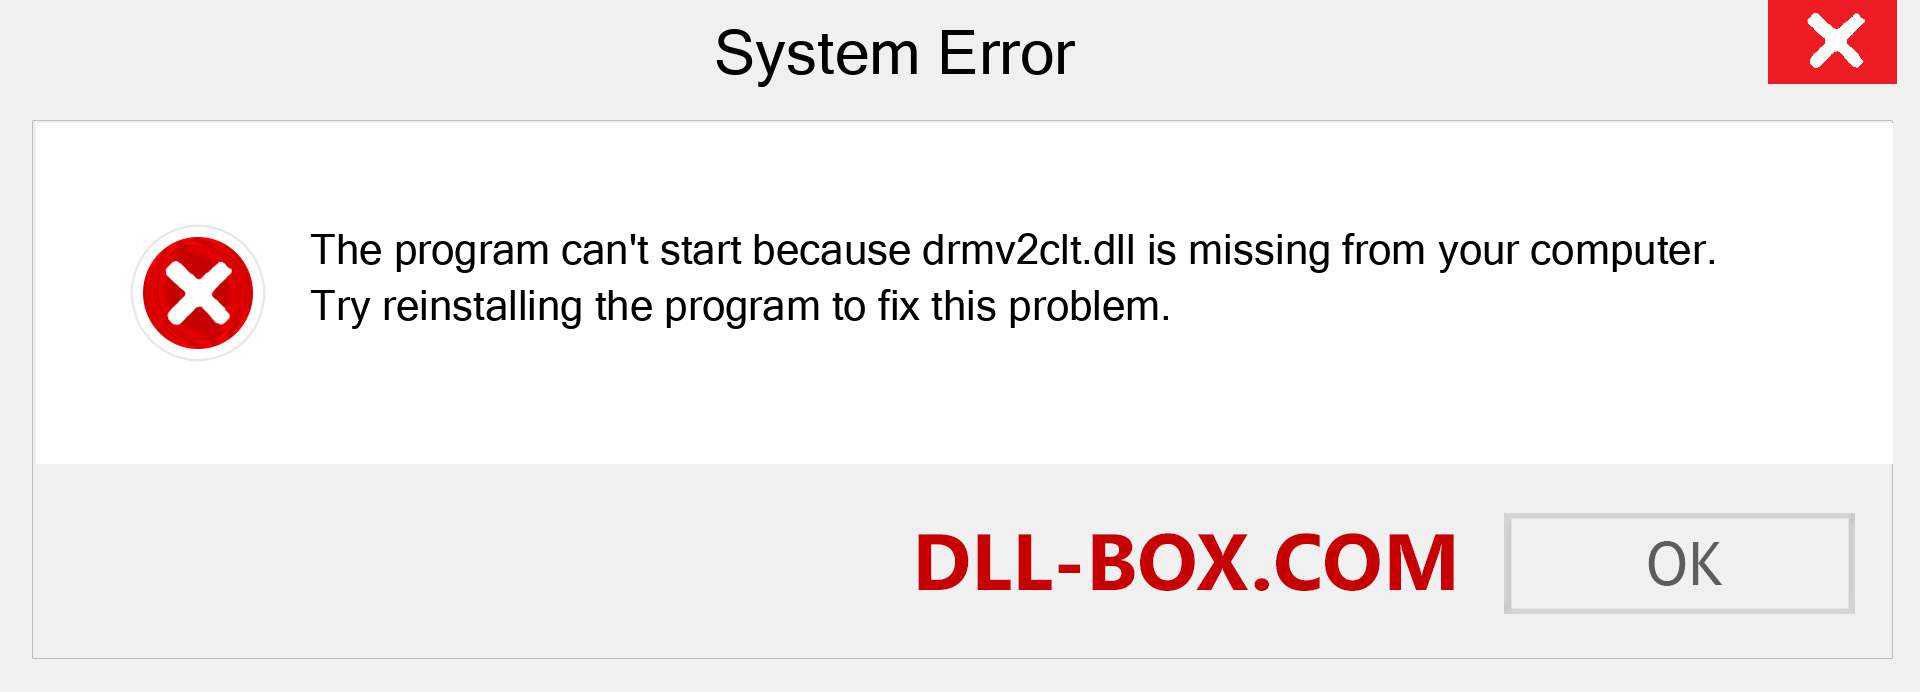  drmv2clt.dll file is missing?. Download for Windows 7, 8, 10 - Fix  drmv2clt dll Missing Error on Windows, photos, images